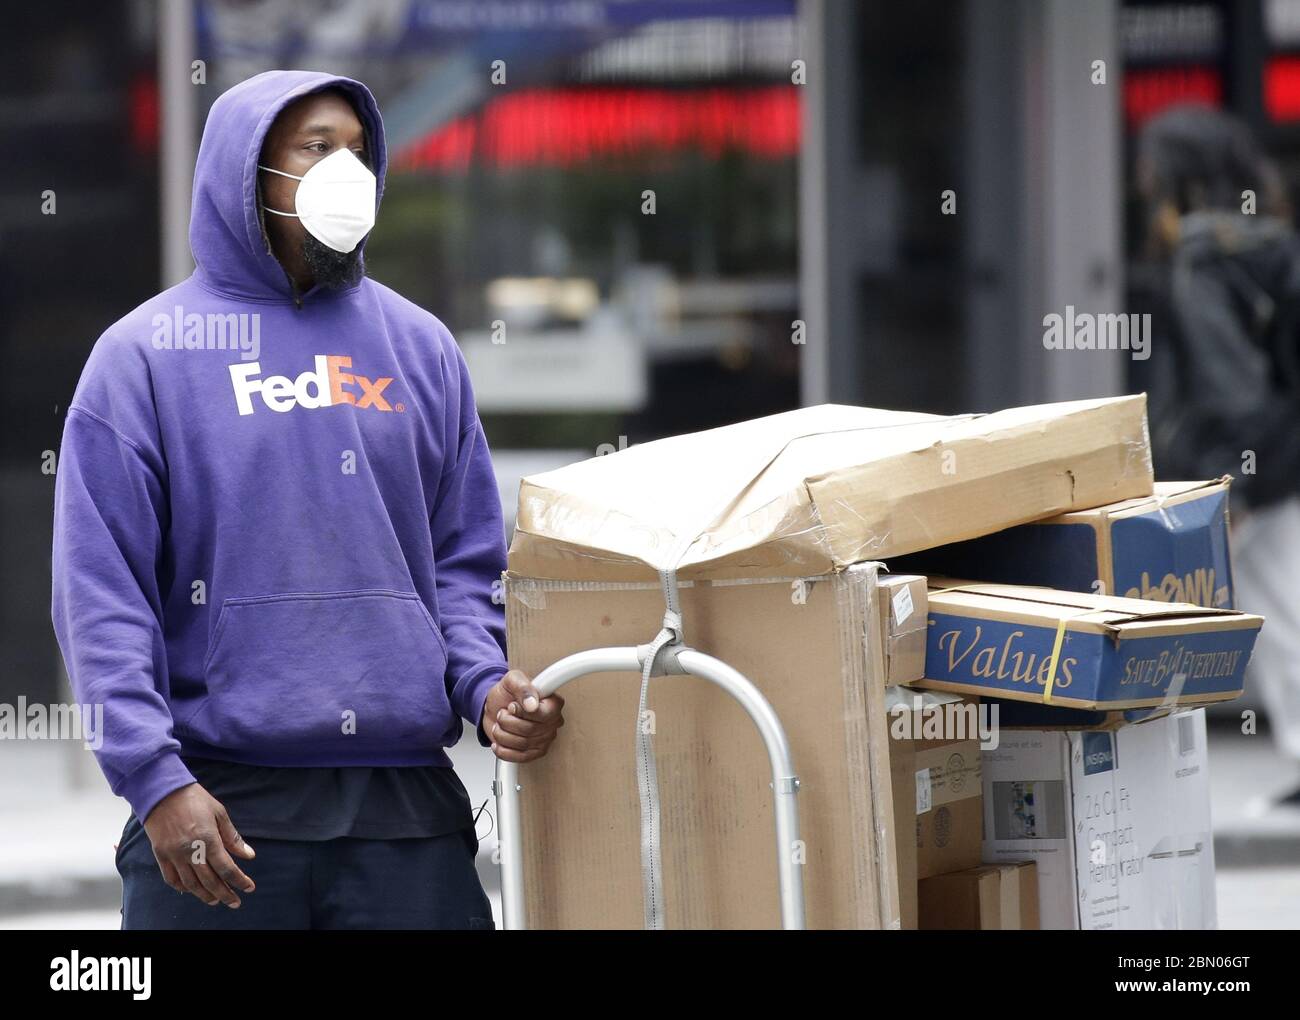 New York, United States. 11th May, 2020. A Federal Express FedEx worker pulls a cart of packages in Times Square in New York City on Monday, May 11, 2020. The Coronavirus pandemic has killed over 20,000 people in New York City and has accounted for over 280, 00 deaths worldwide. Photo by John Angelillo/UPI Credit: UPI/Alamy Live News Stock Photo